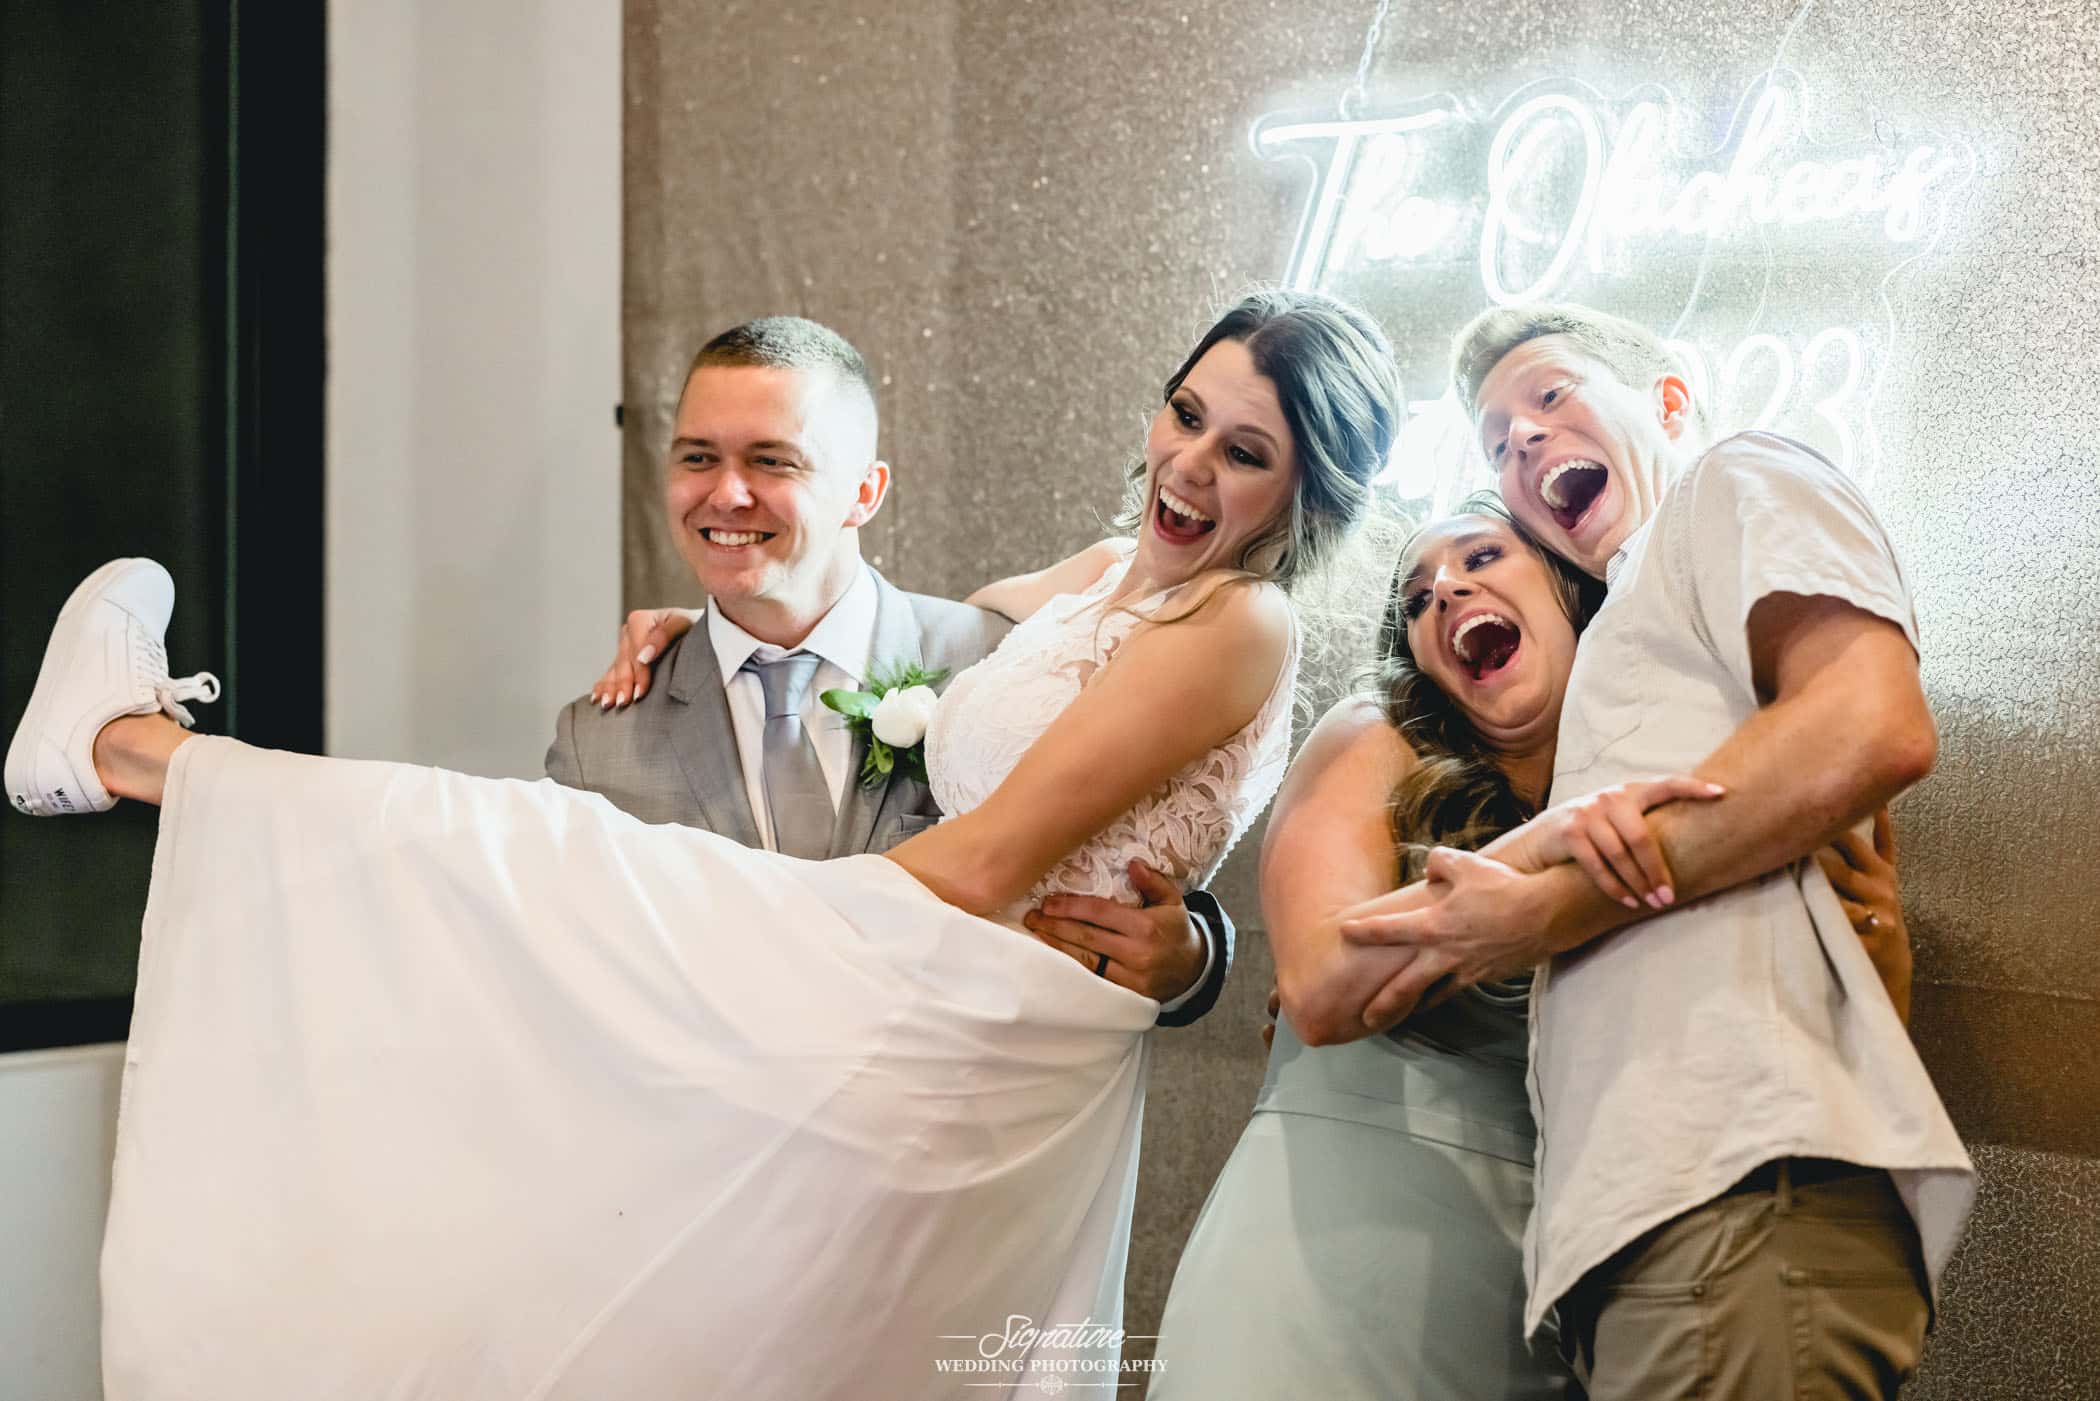 Groom holding bride with wedding guests for photo booth